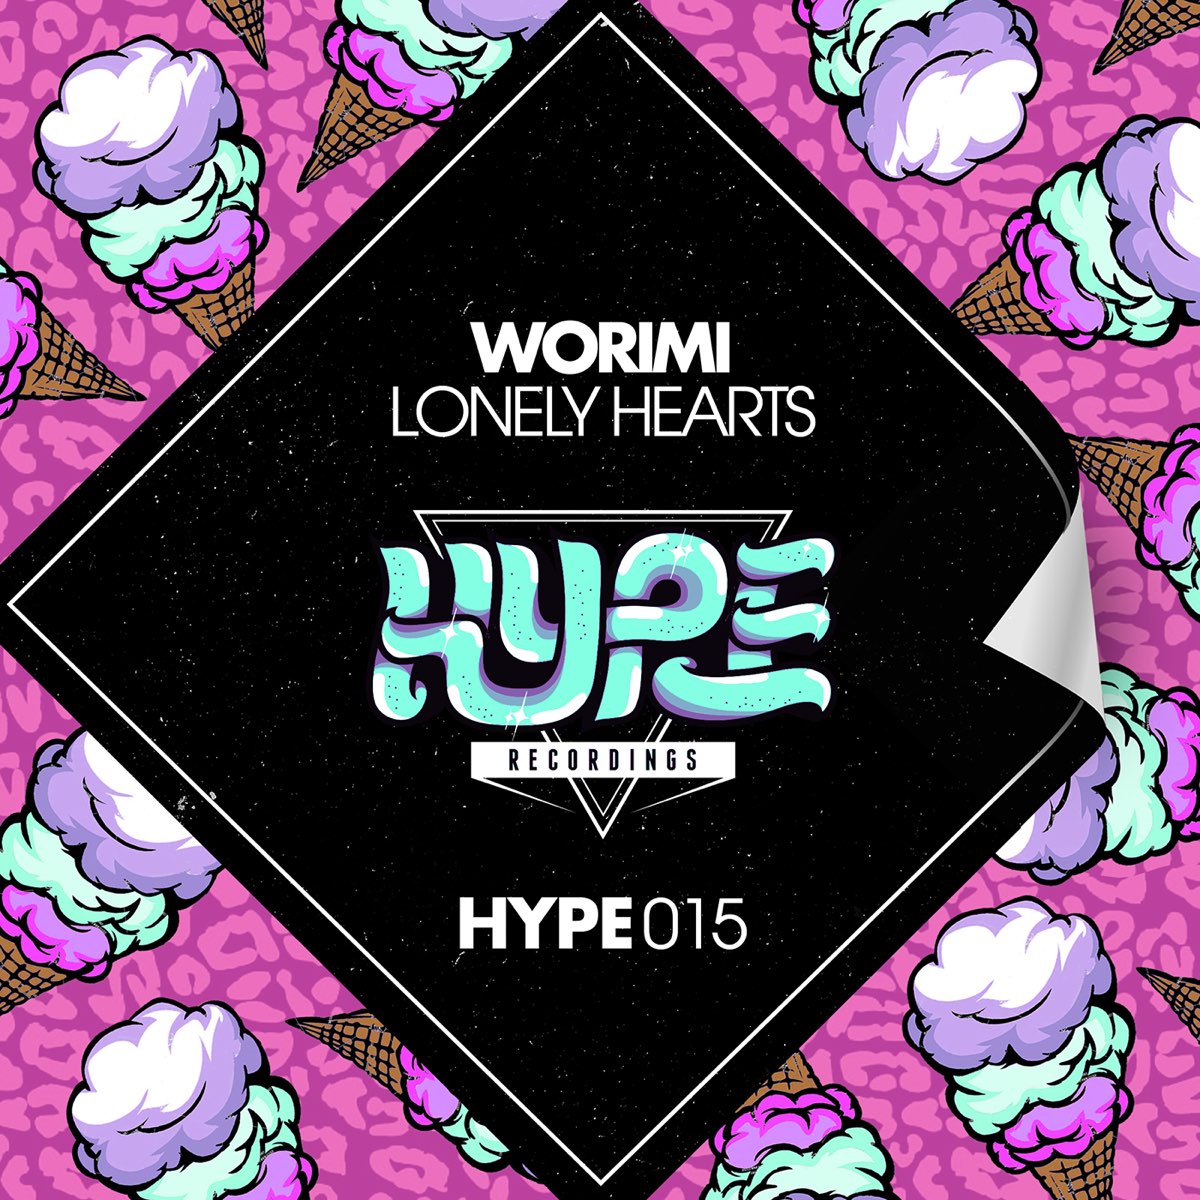 Hype Labels. Lonely Heart Original Mix Synthetic Fantasy. Lonely mixed